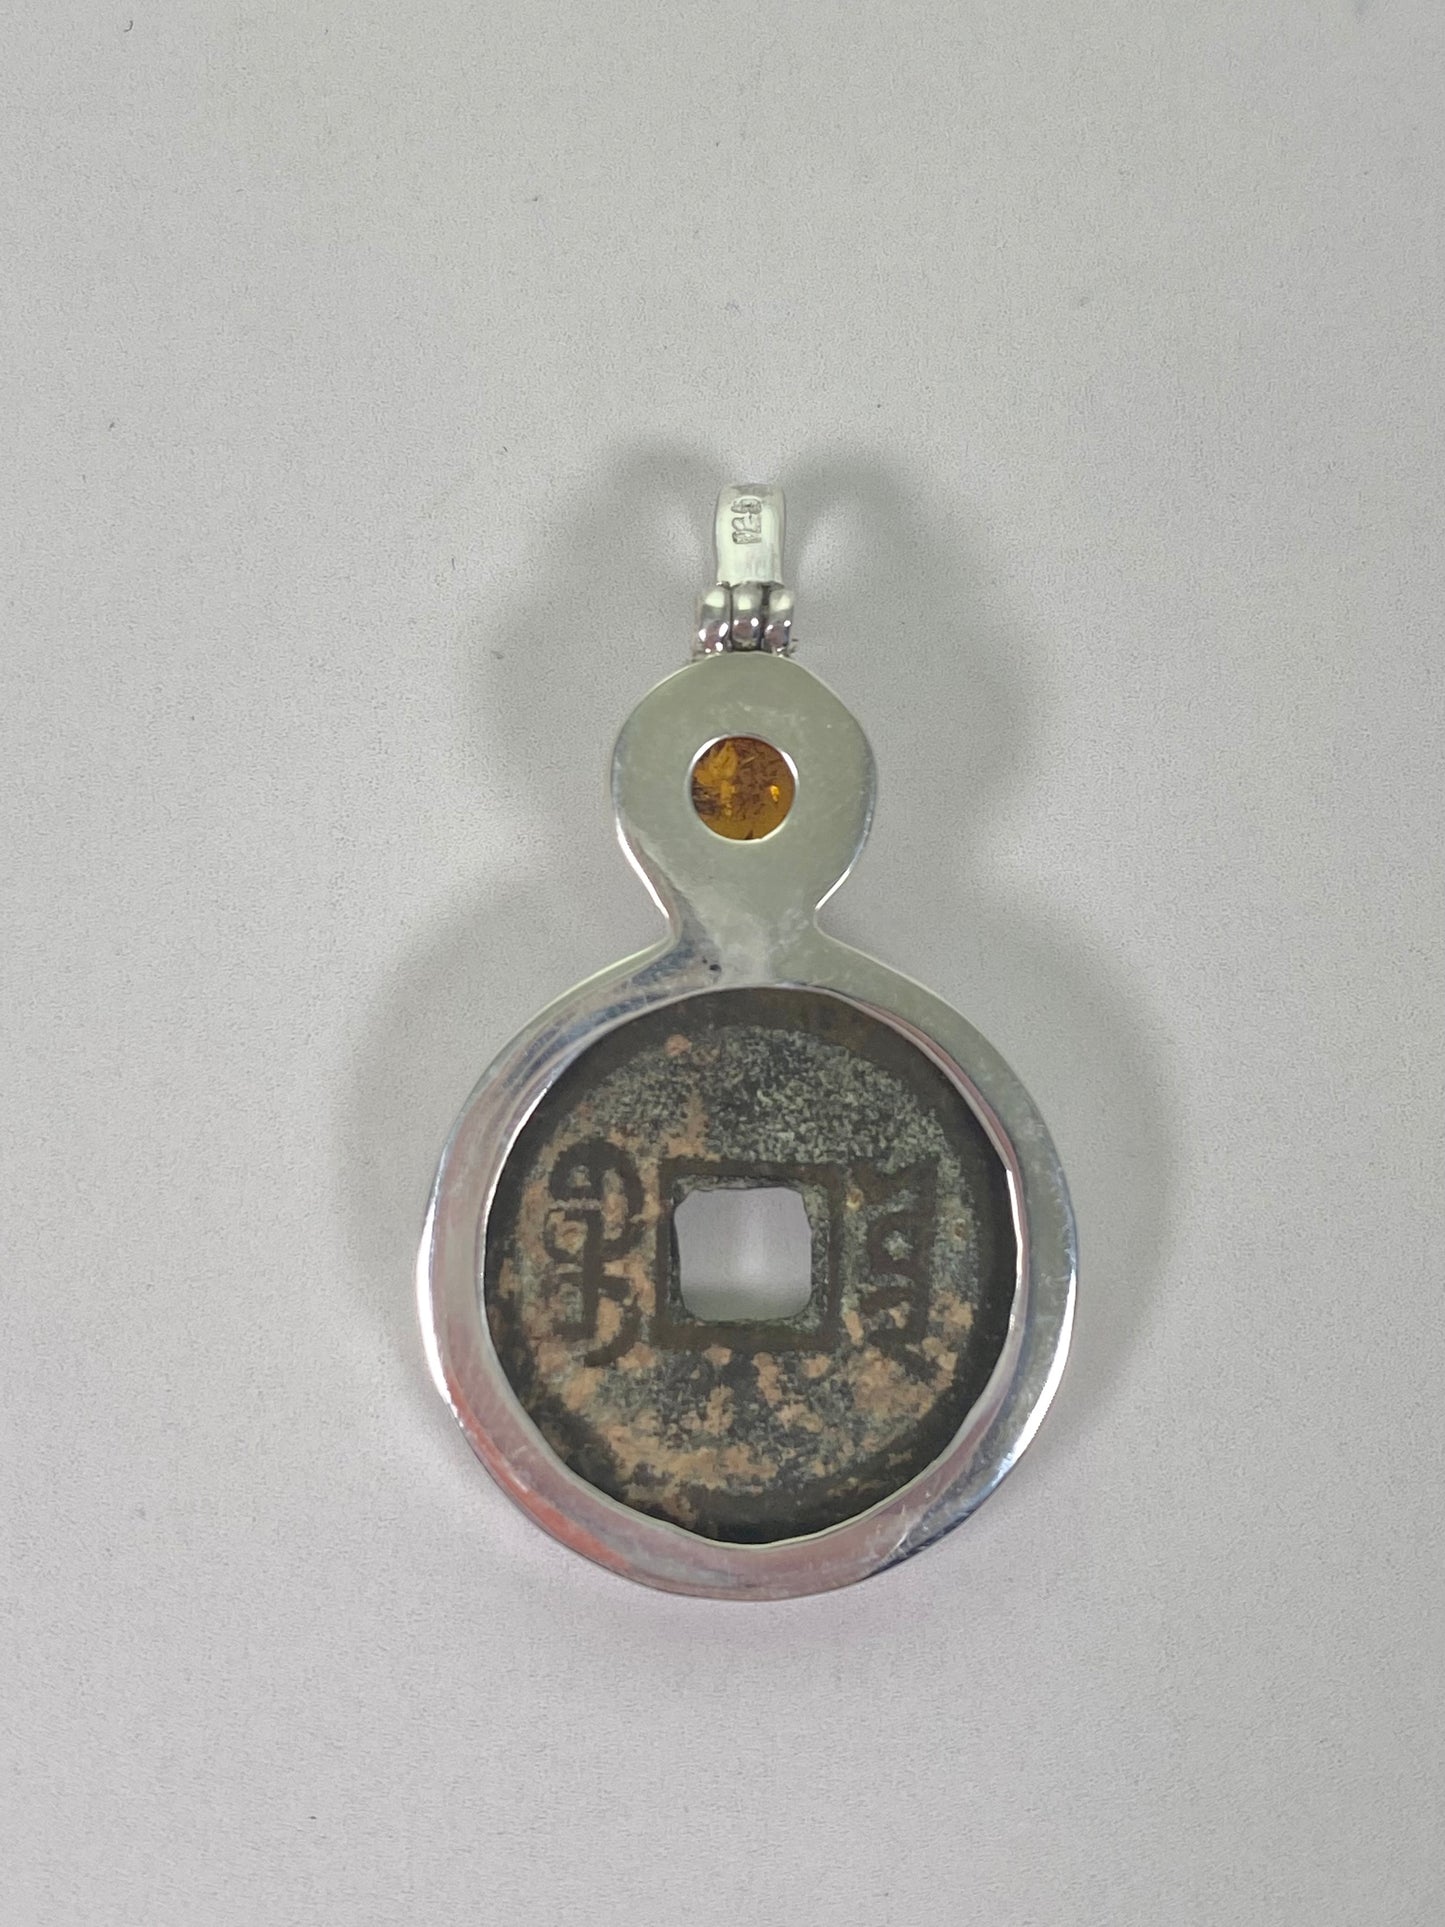 Antique Qing Dynasty Jia Qing Reign (1796-1820) Cash Coin Pendant in Sterling Silver w Amber